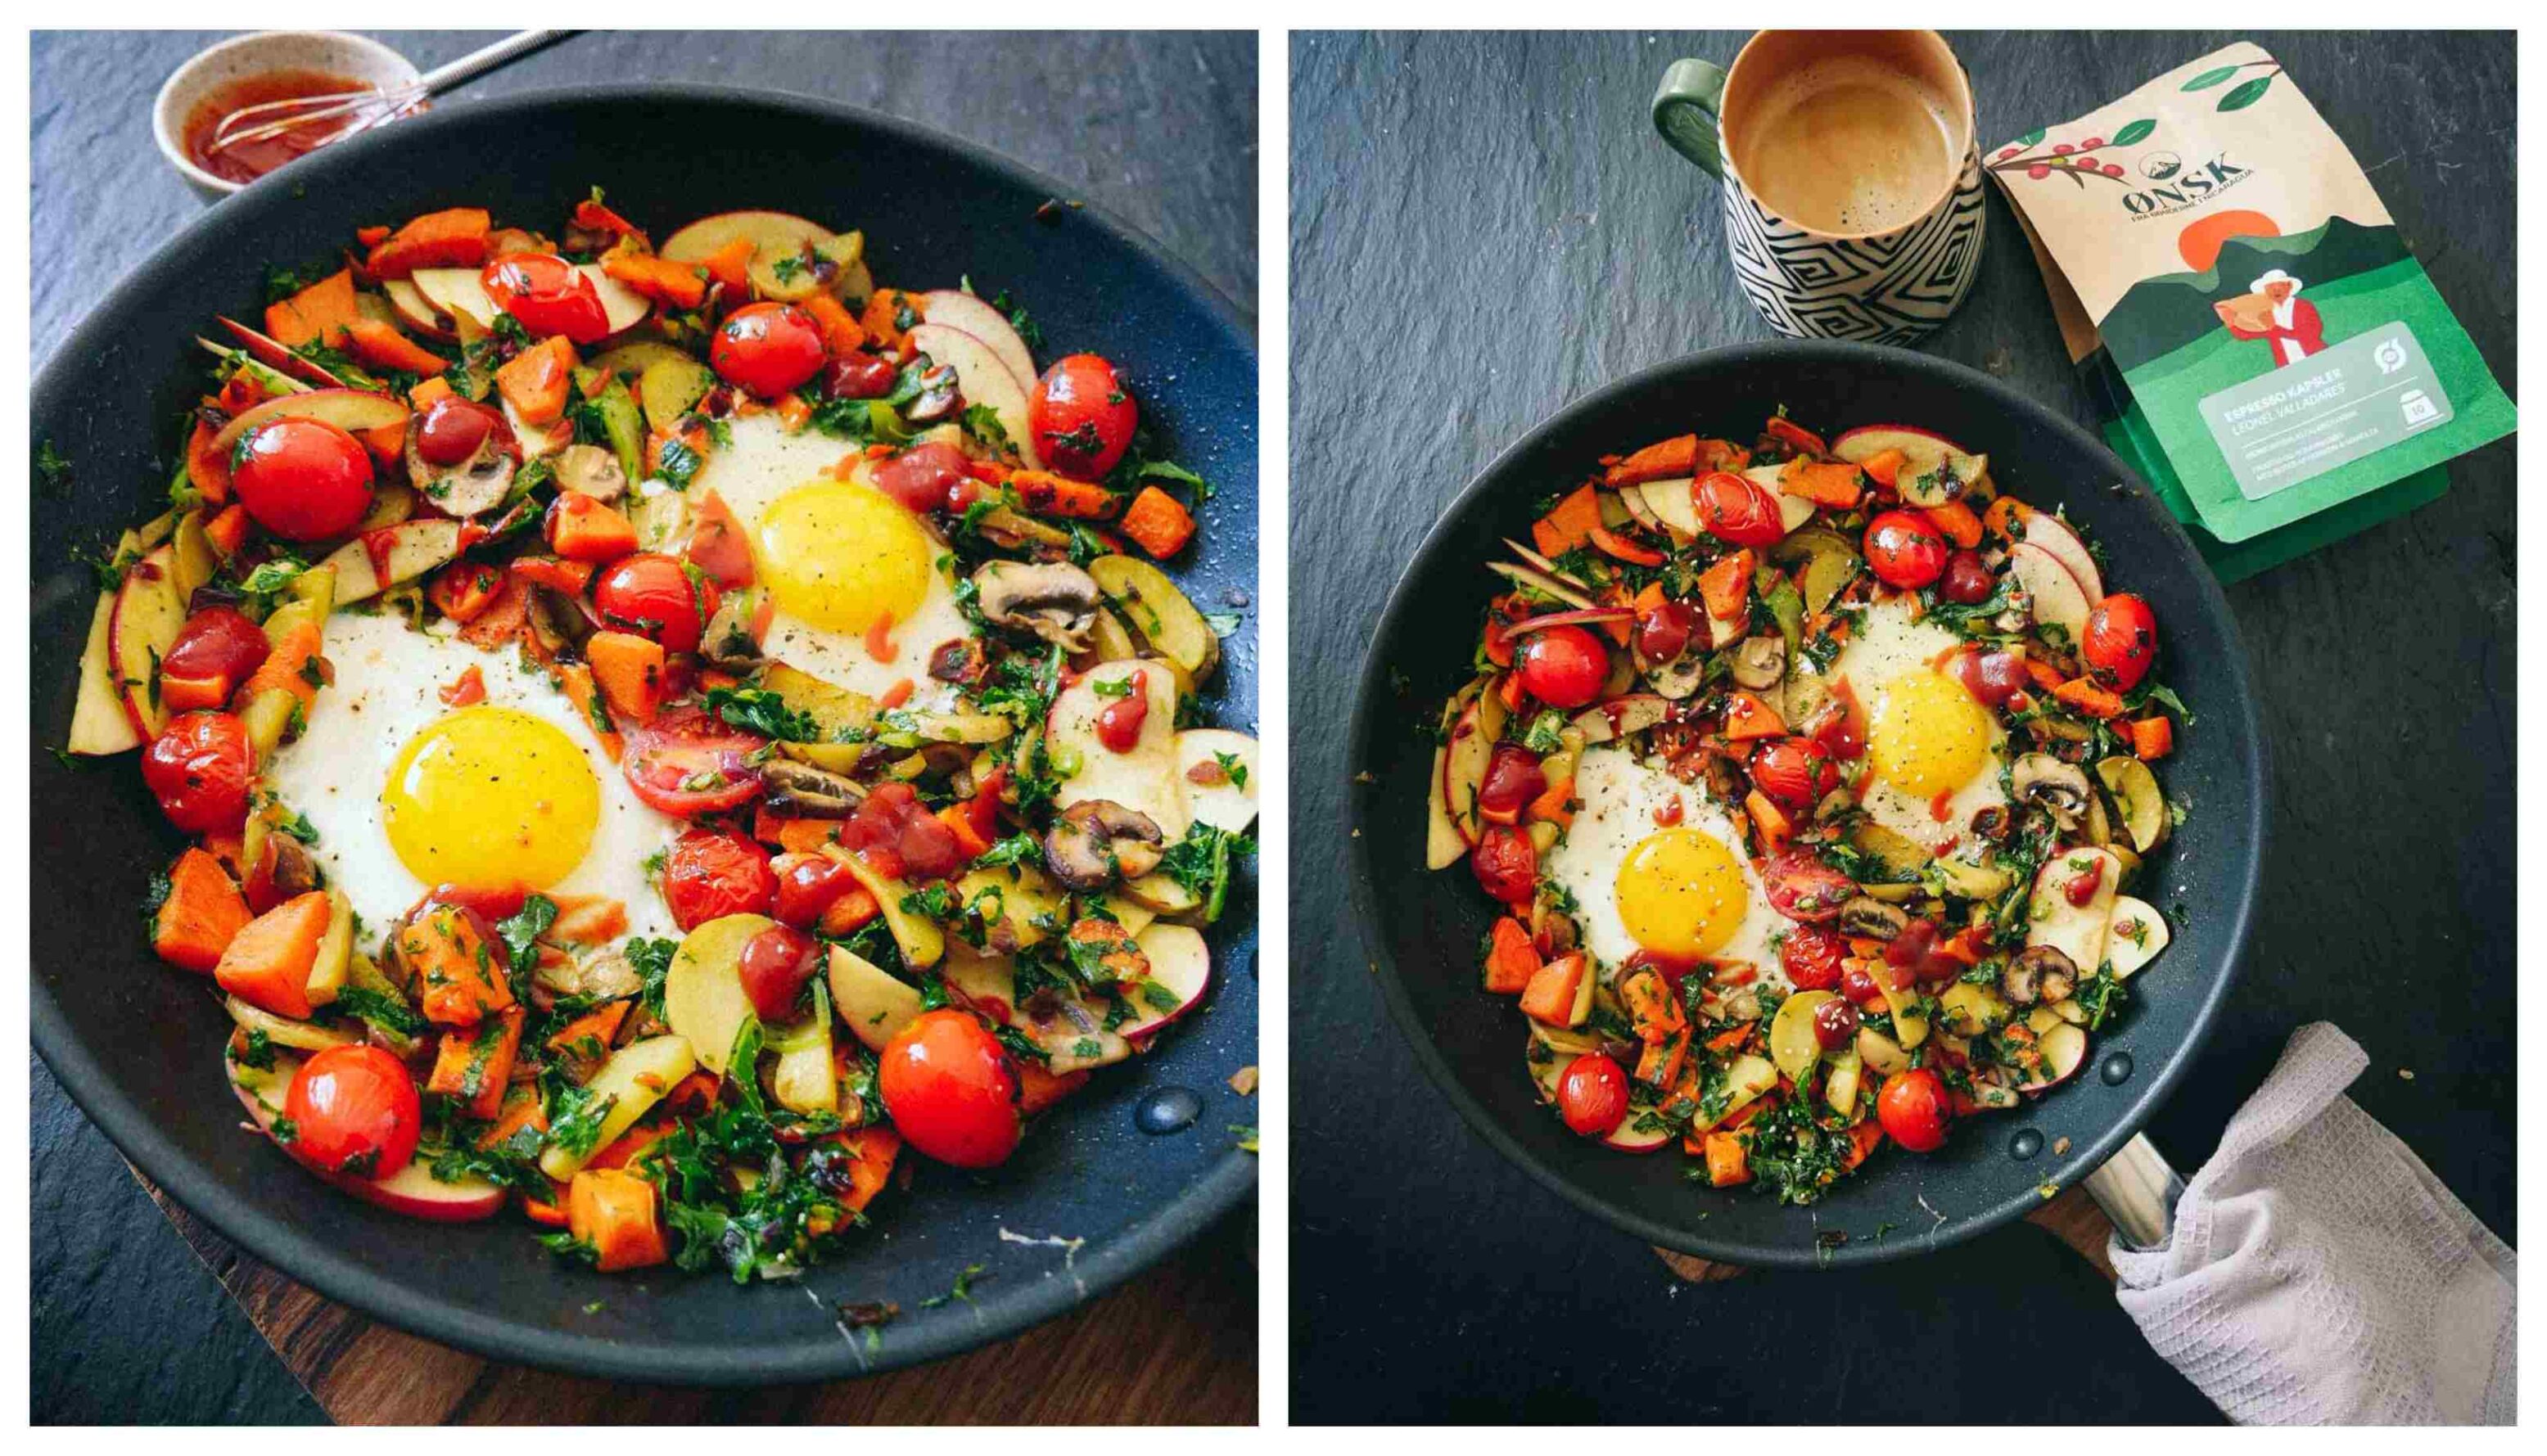 fried eggs and vegetables